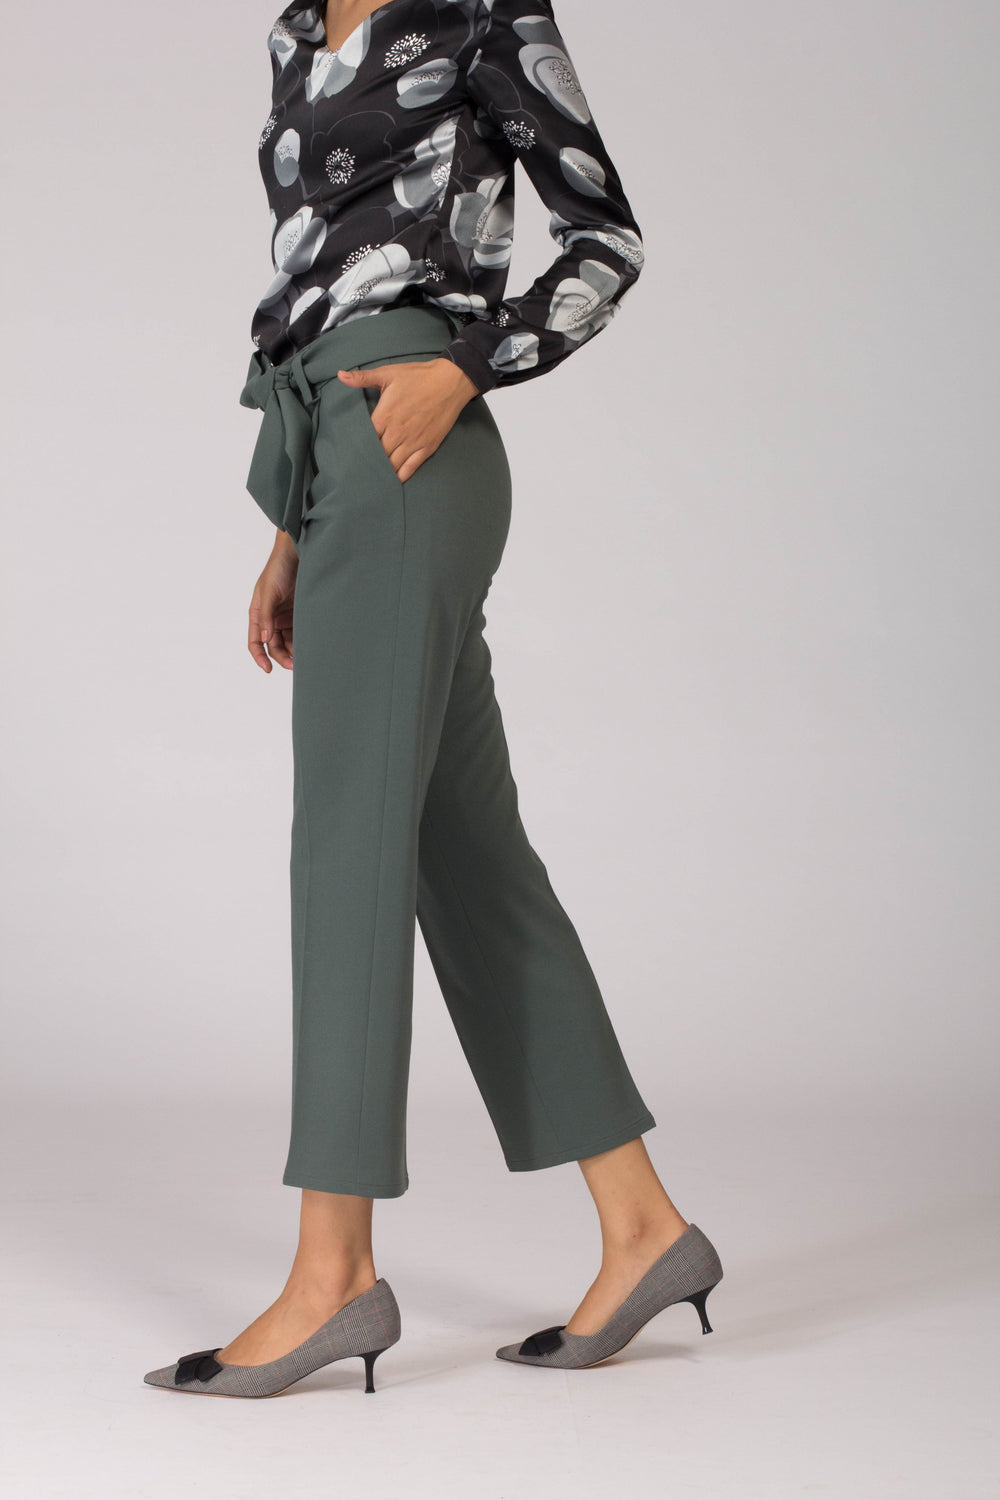 Stretch Comfortable Green women's formal pants and trousers for office. Shop online for all sizes, plus size culottes , trousers, and formal palazzo pants at www.intermod.in